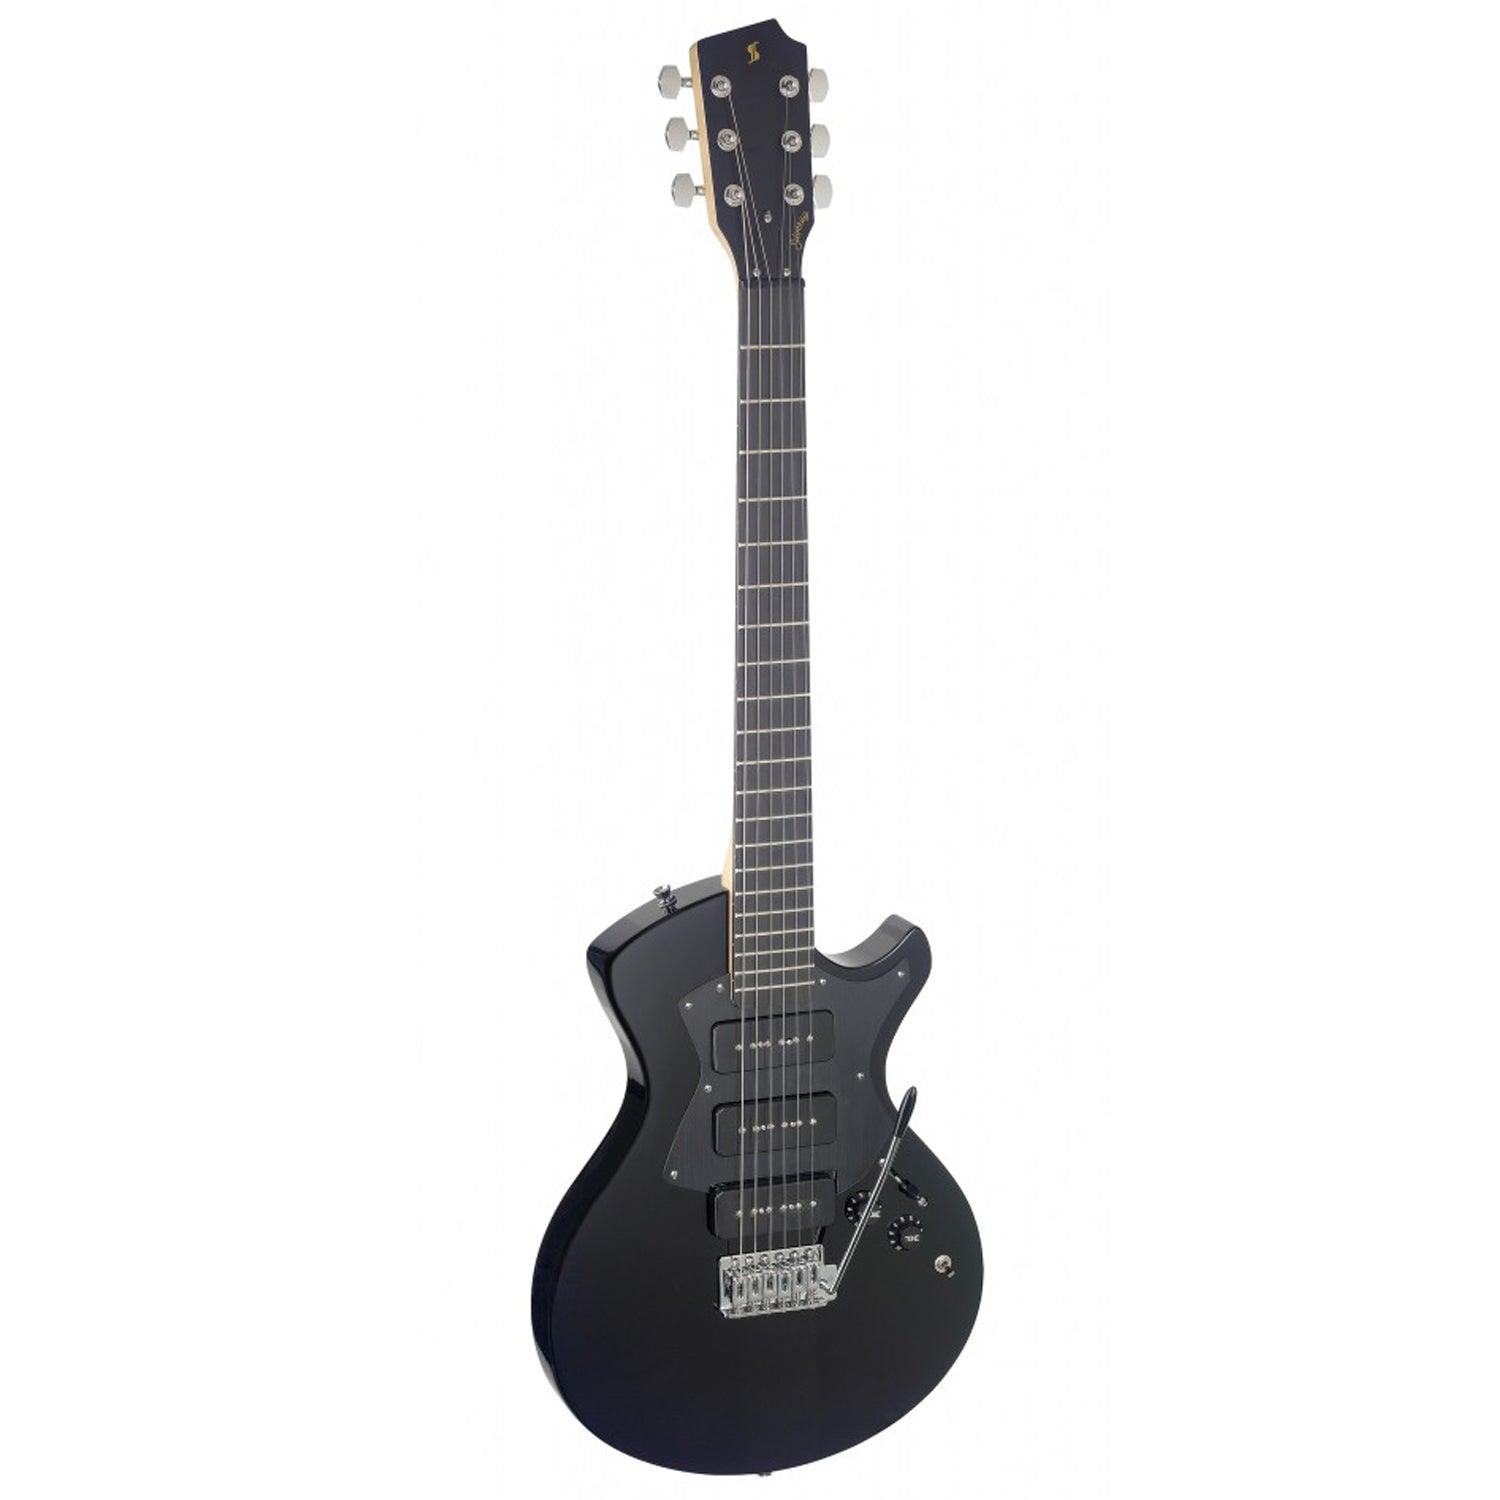 Stagg SVY NASH BK Silveray series Nash model Electric guitar with solid alder body - DY Pro Audio